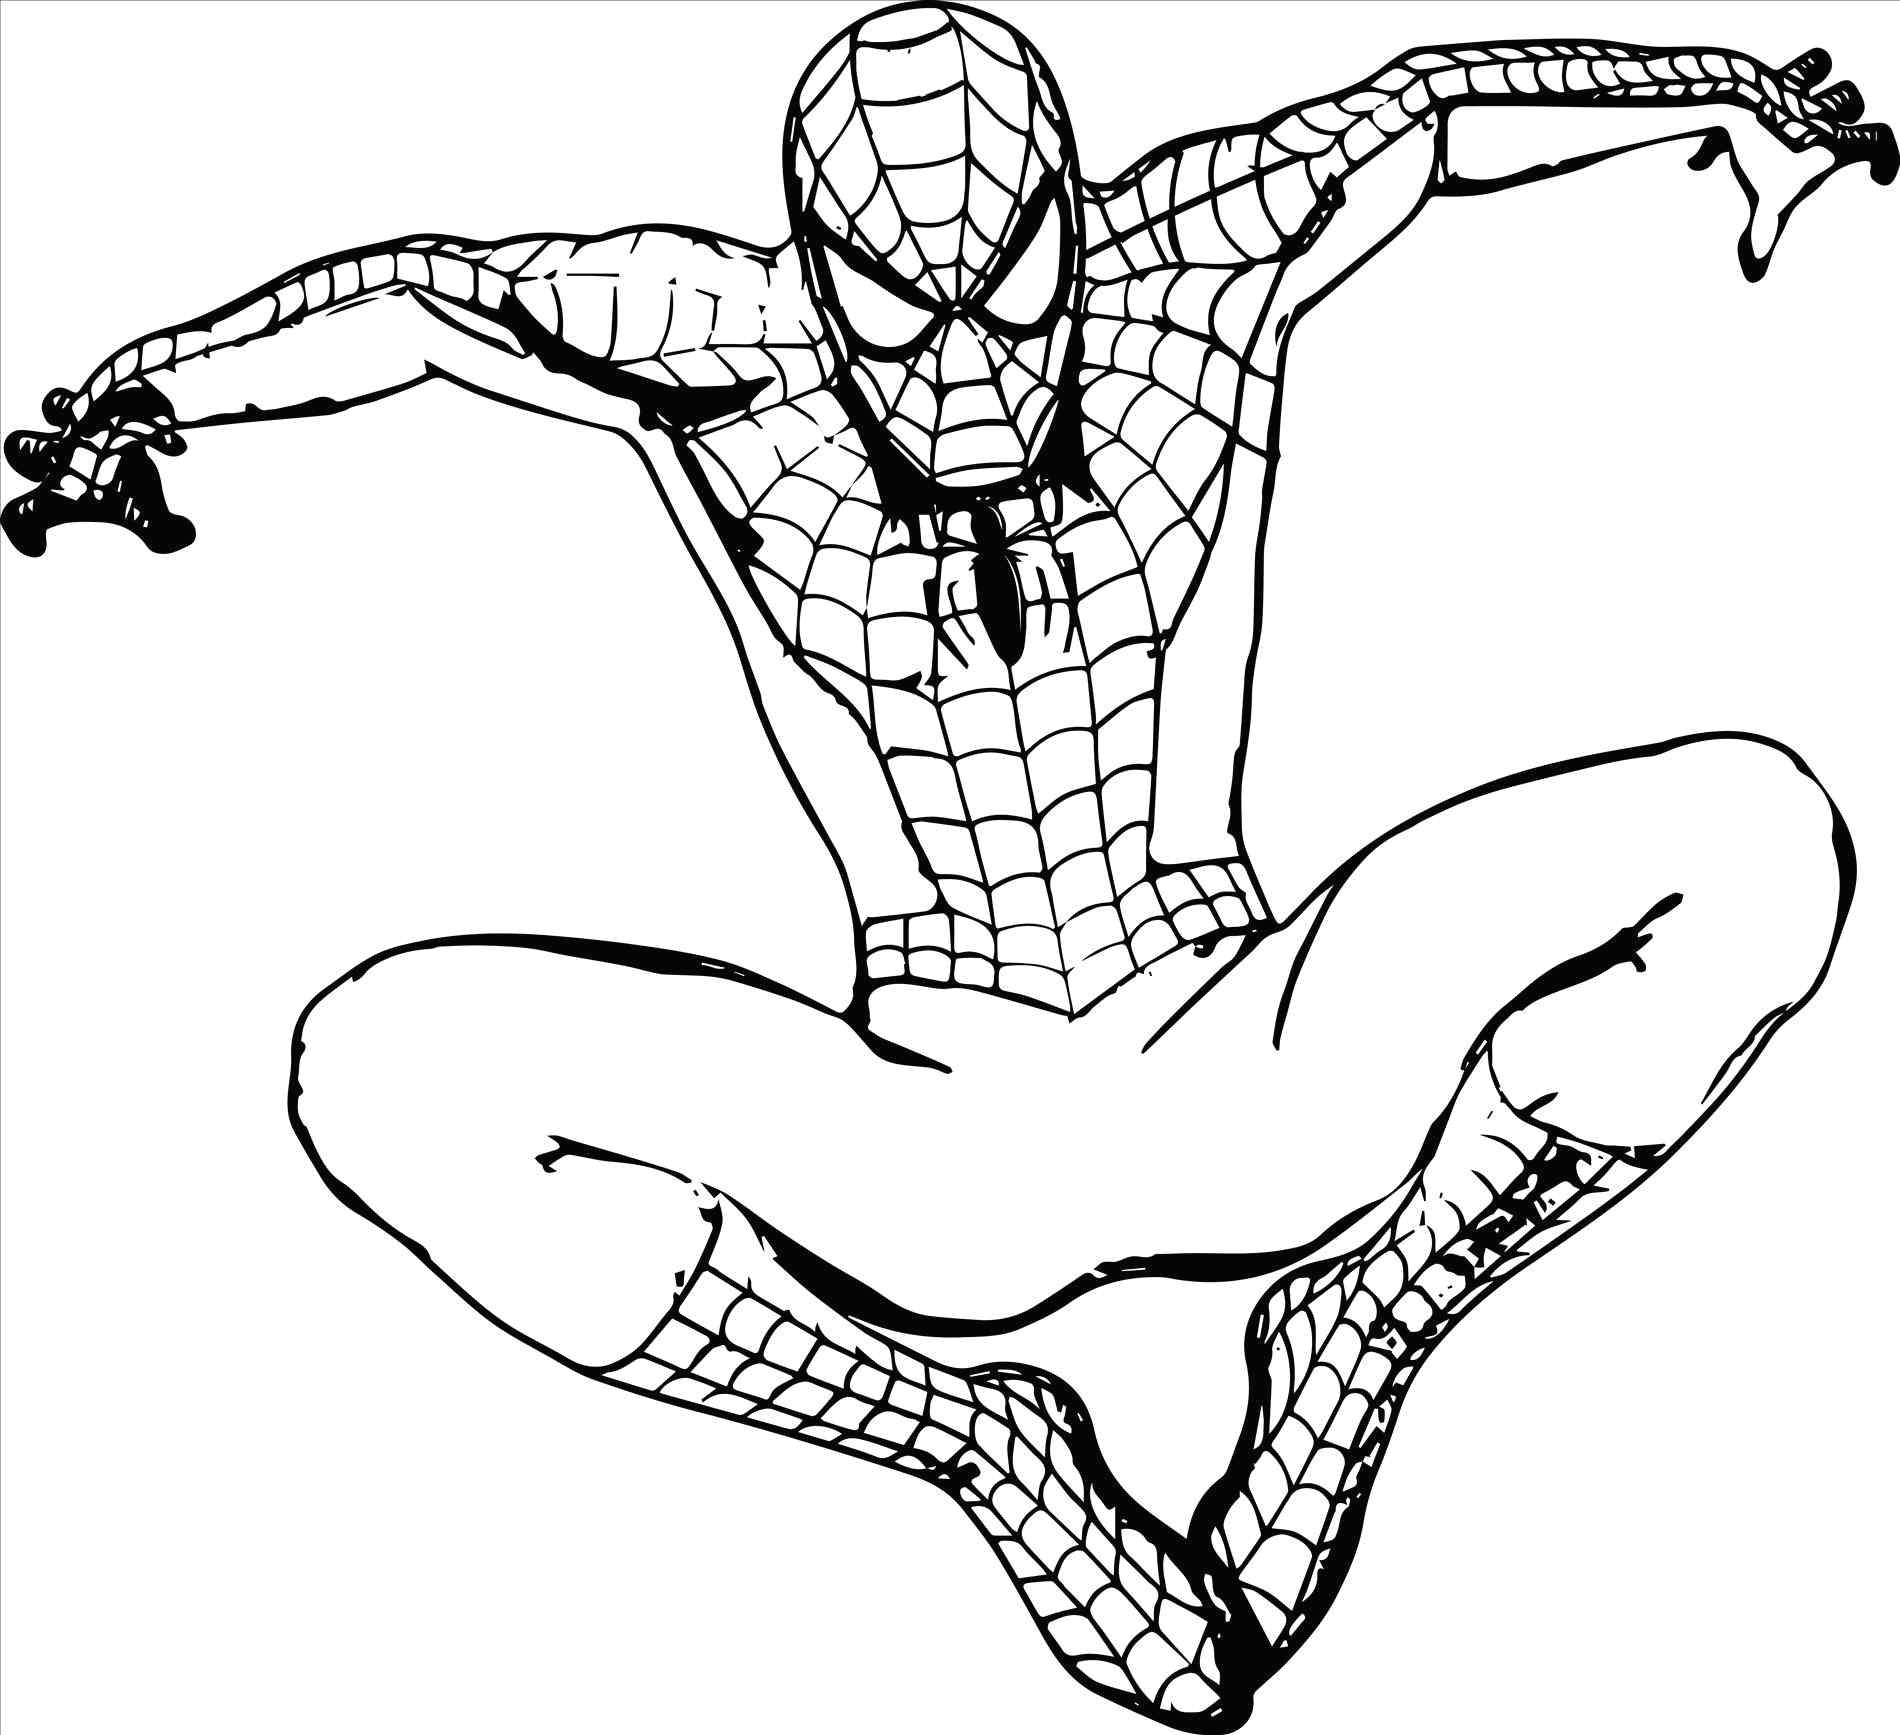 Drawings Easy to Copy Superheroes Easy to Draw Spiderman Coloring Pages Luxury 0 0d